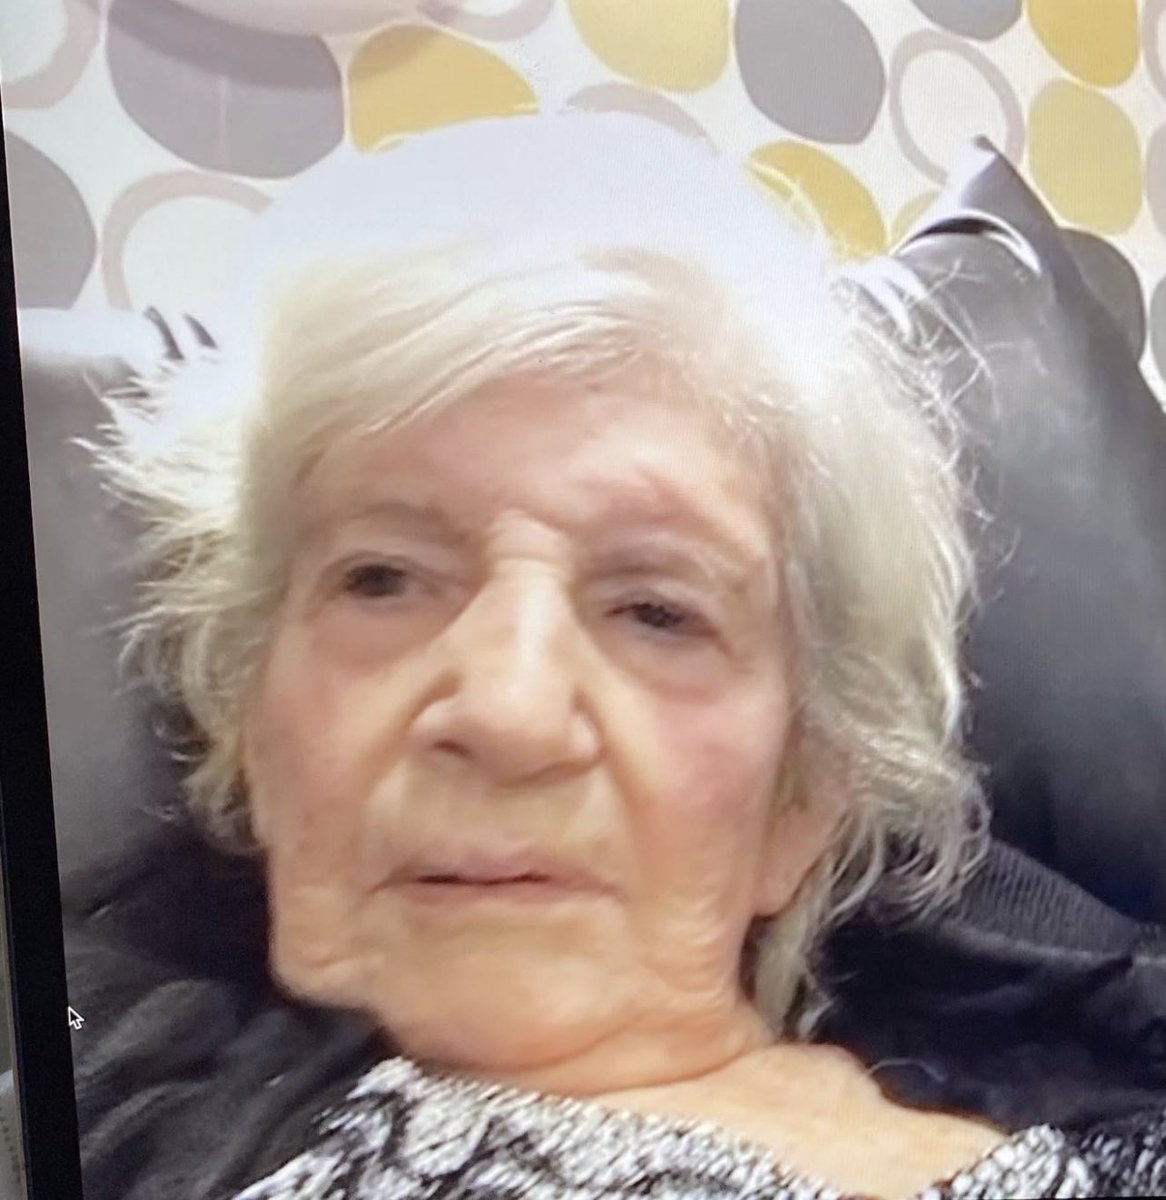 Update: I had a face time with my mum Gloria today. She never said a word or even smiled. I am going on BBC news and ITV news this week to fight for the right to see my mummy. If you are in a similar place look up rightsforresidents.co.uk @rightsforresid2 #rightsforresidents